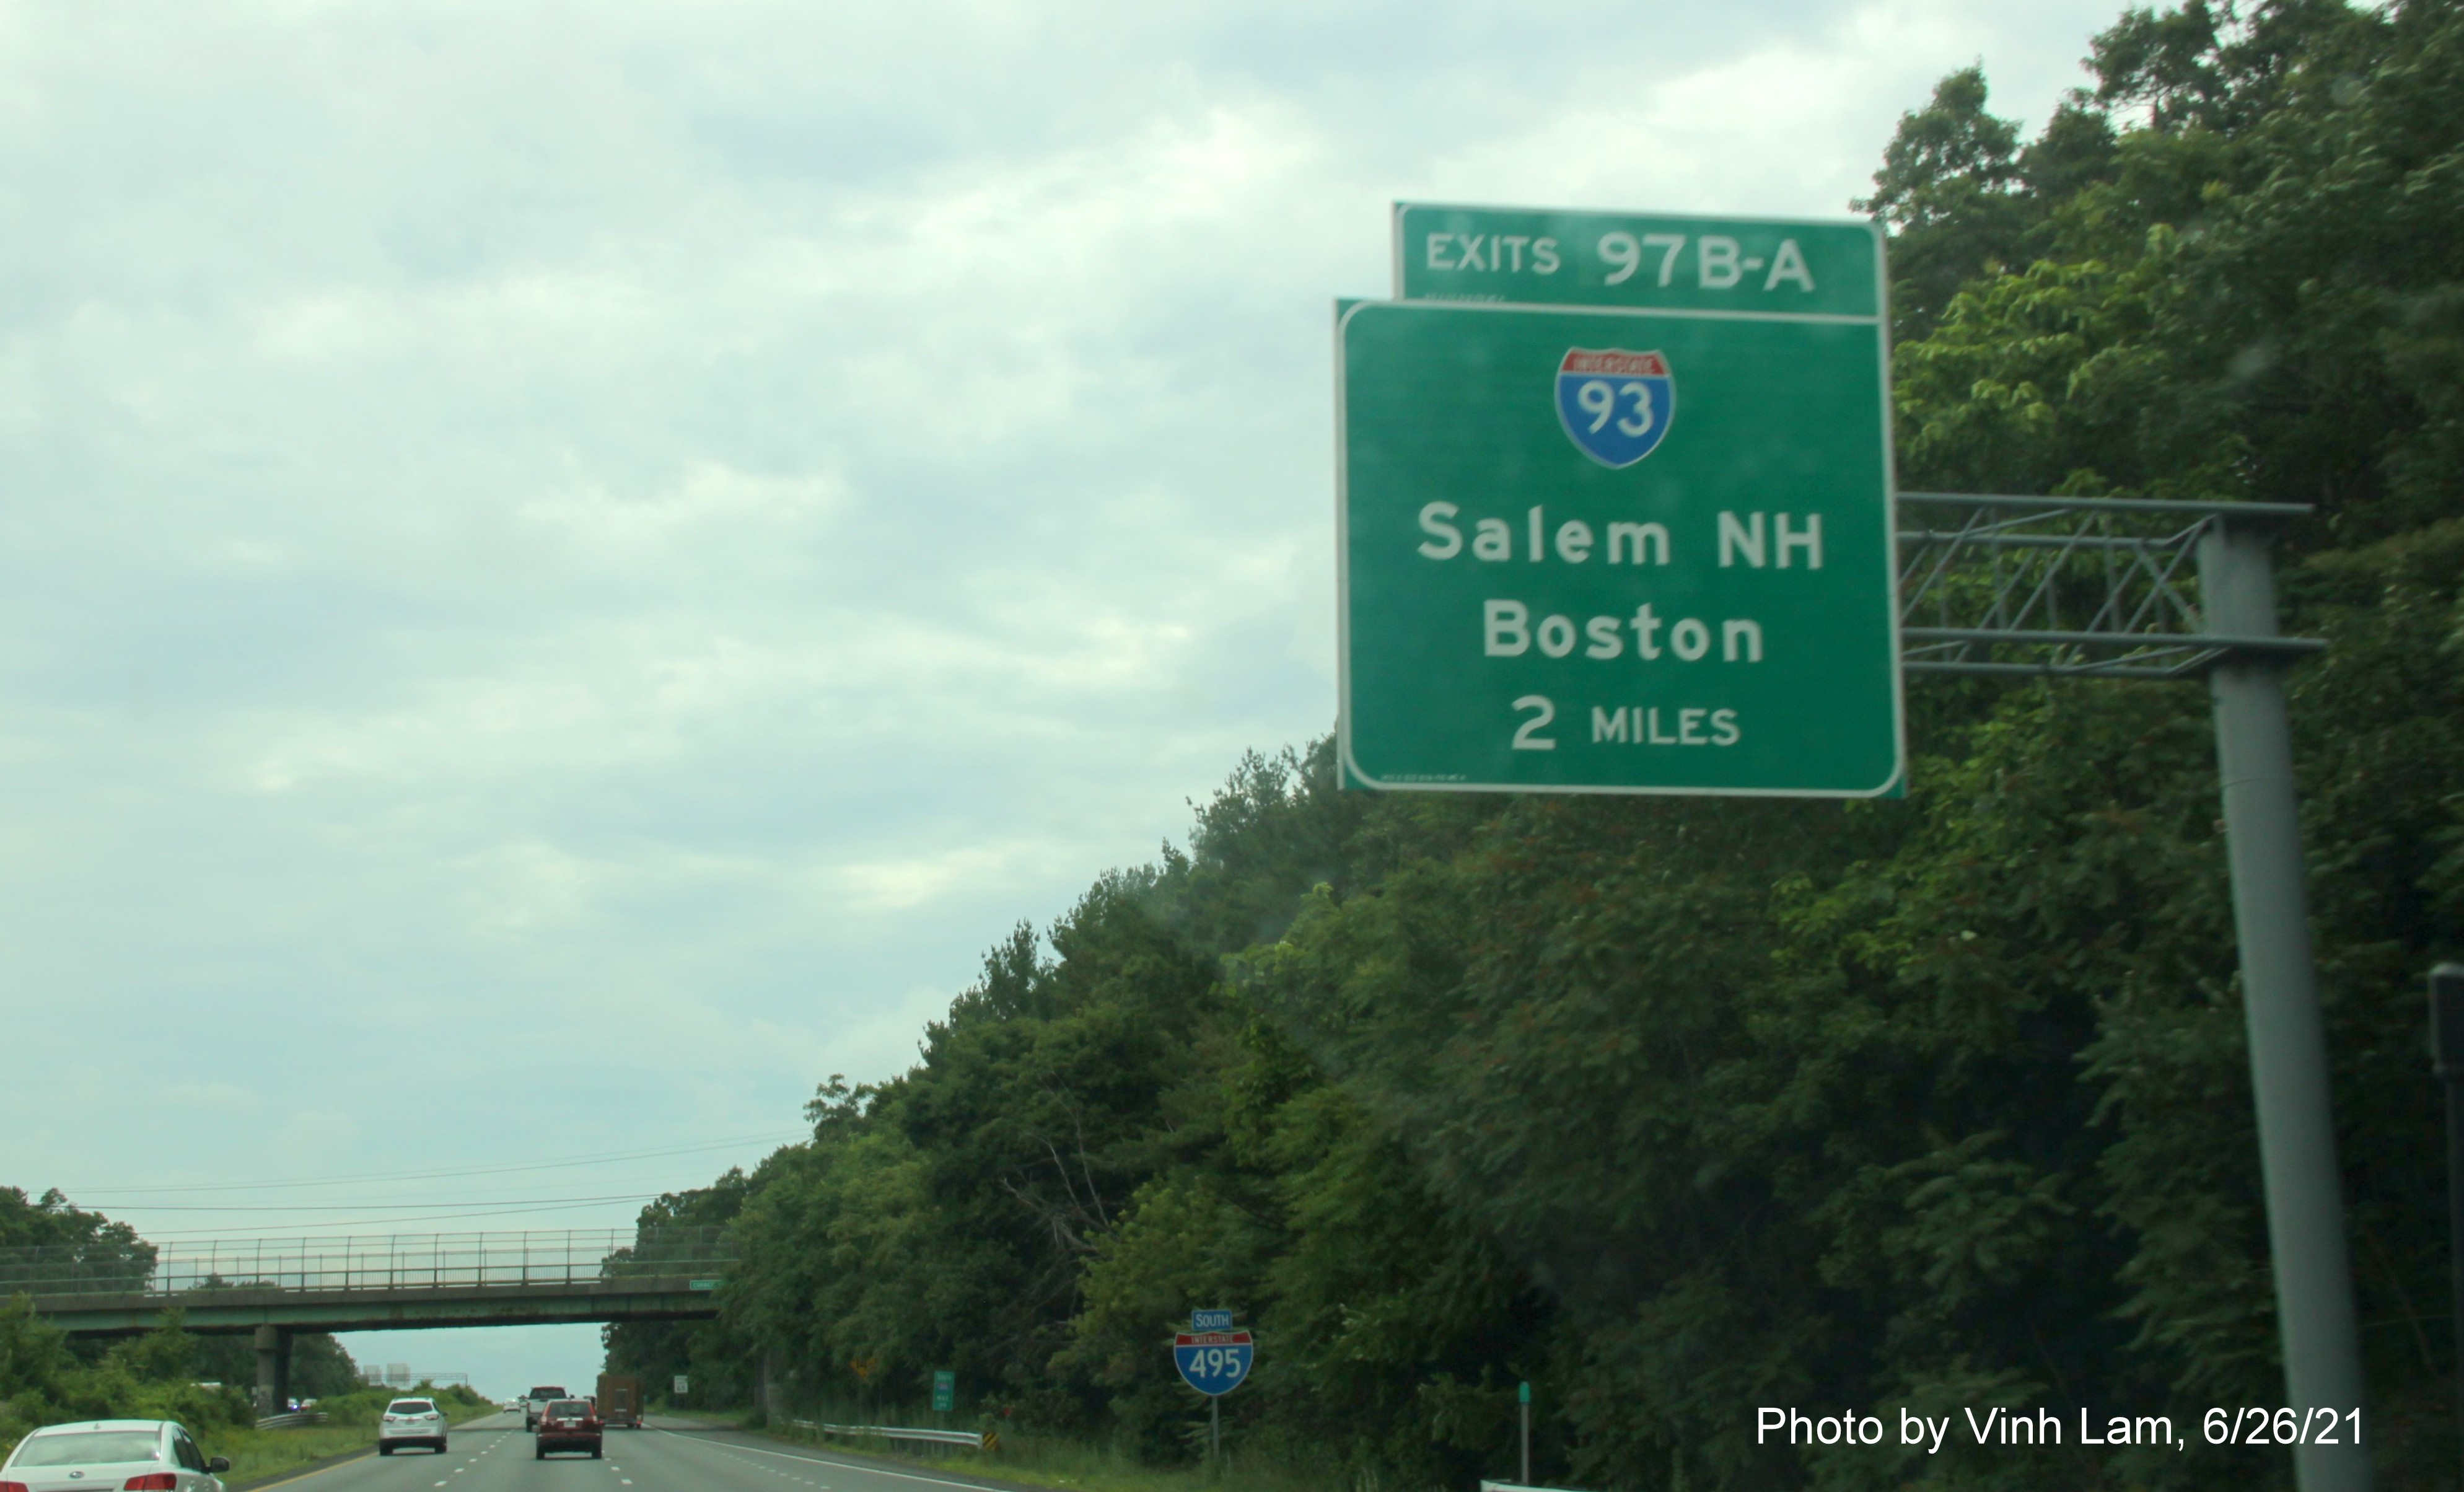 Image of 2 Miles advance sign for I-93 exits with new milepost based exit numbers on I-495 South in Andover, by Vinh Lam, June 2021